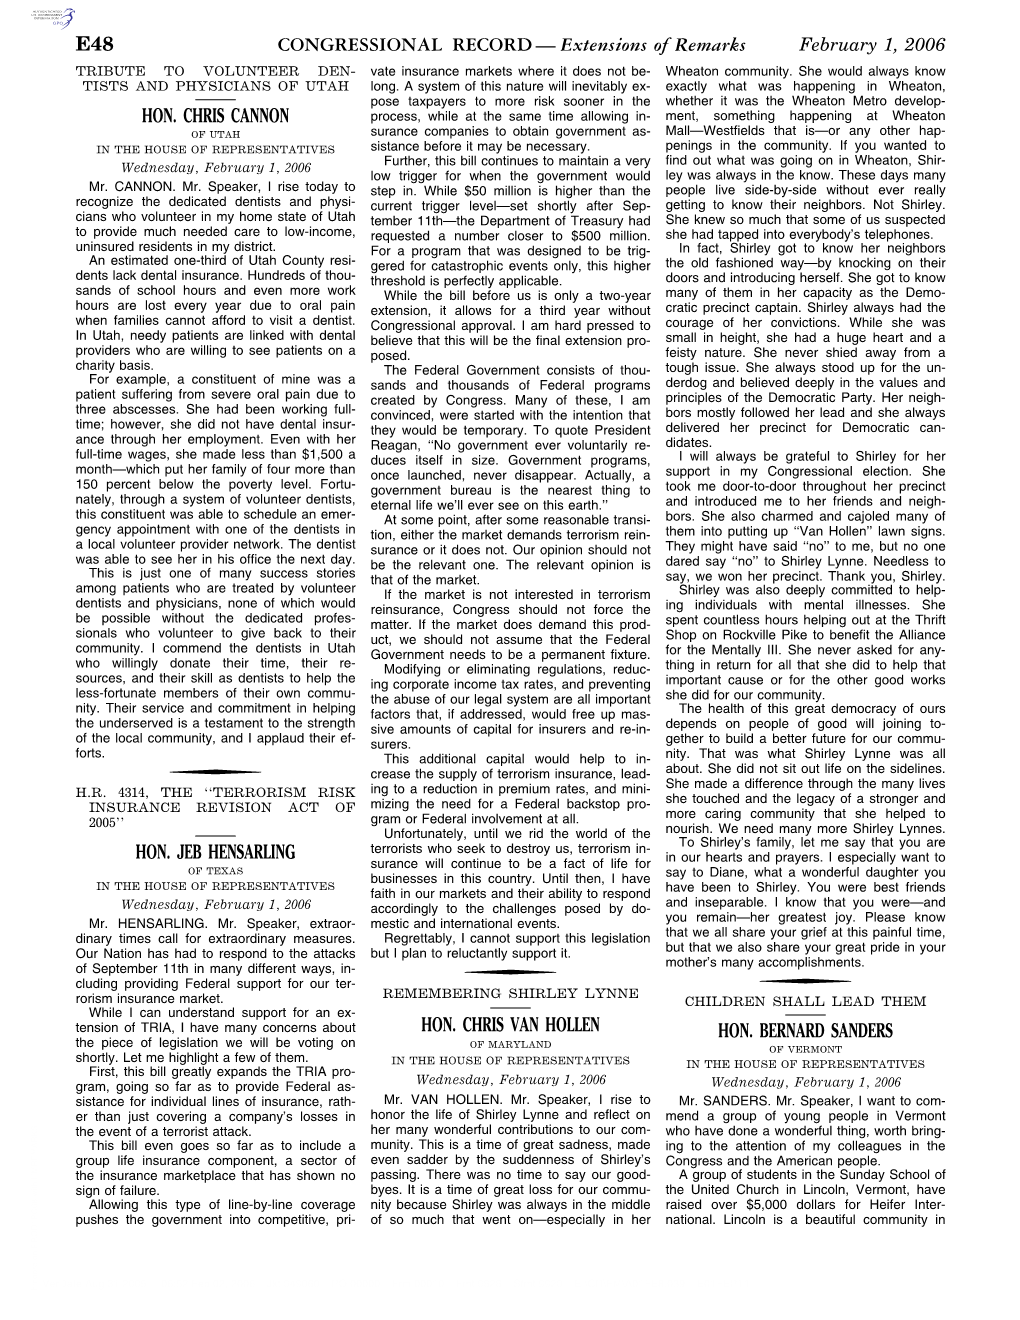 CONGRESSIONAL RECORD — Extensions of Remarks February 1, 2006 TRIBUTE to VOLUNTEER DEN- Vate Insurance Markets Where It Does Not Be- Wheaton Community